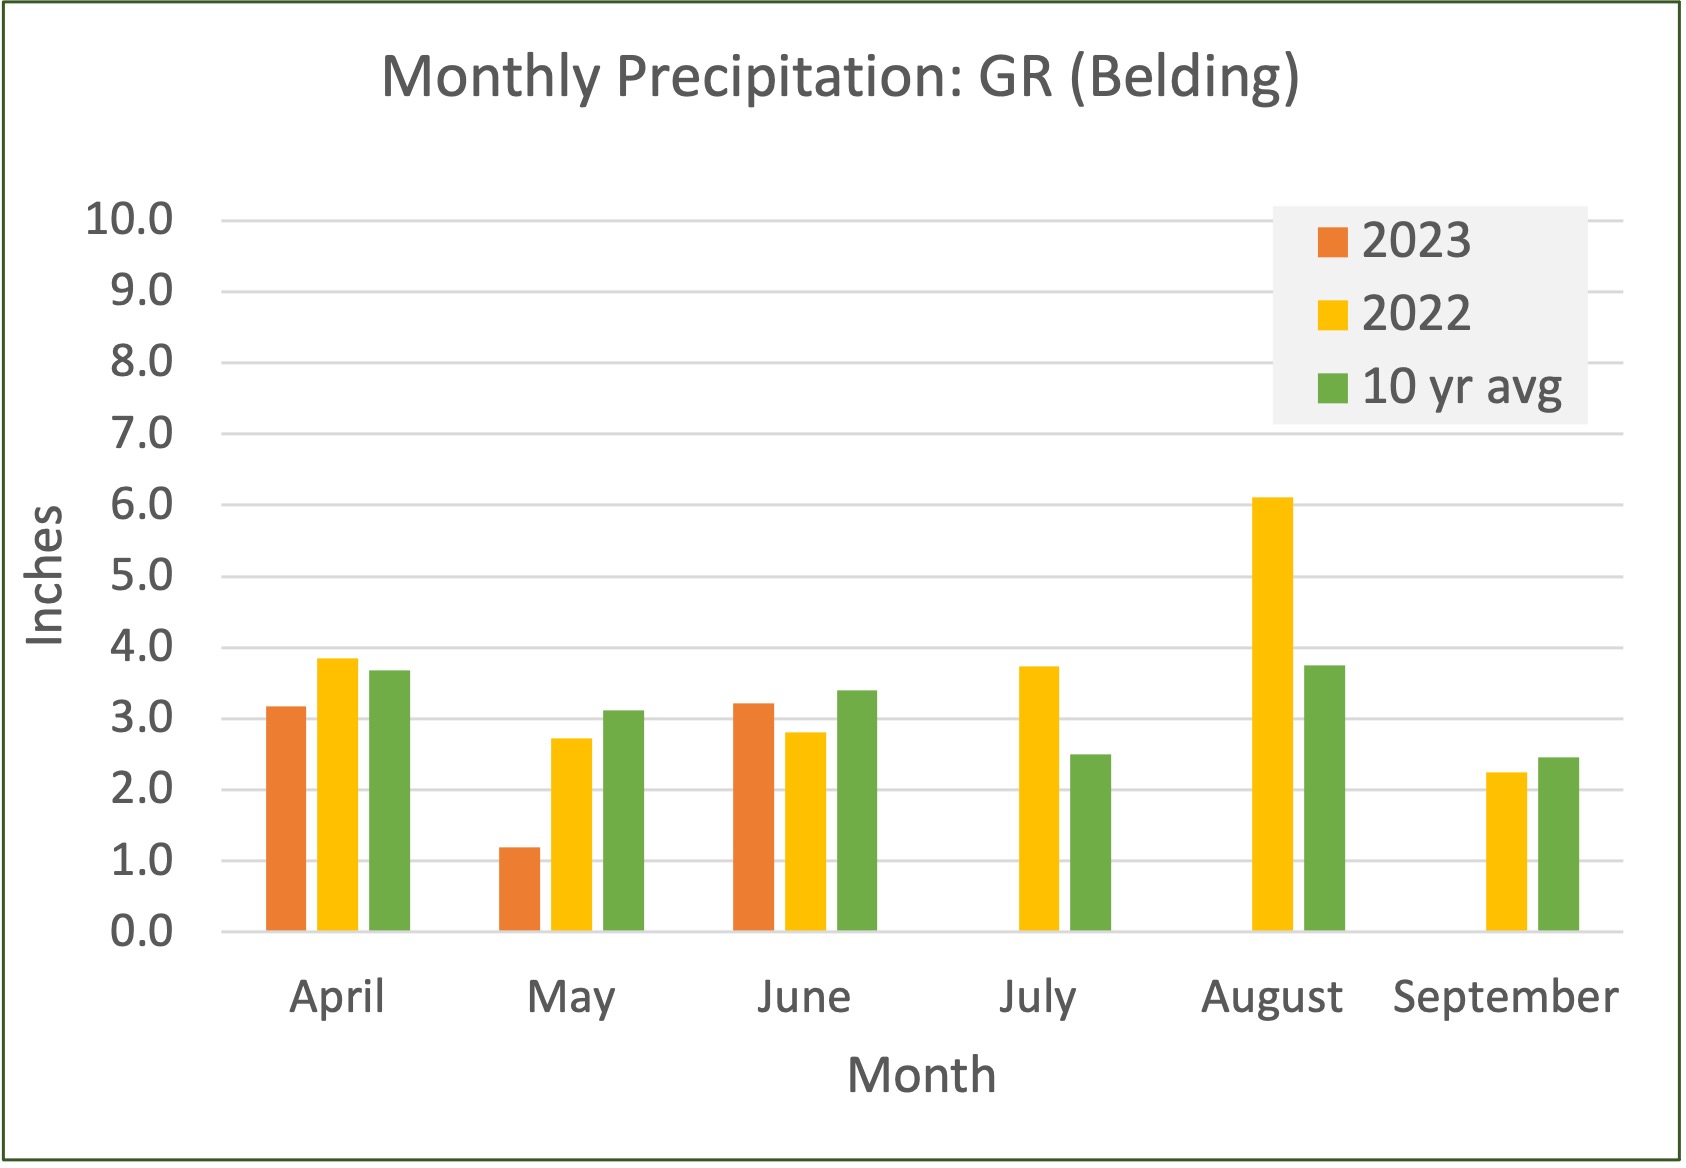 Precipitation graph by month showing April, May, June 2023 compared to 2022 and long term average